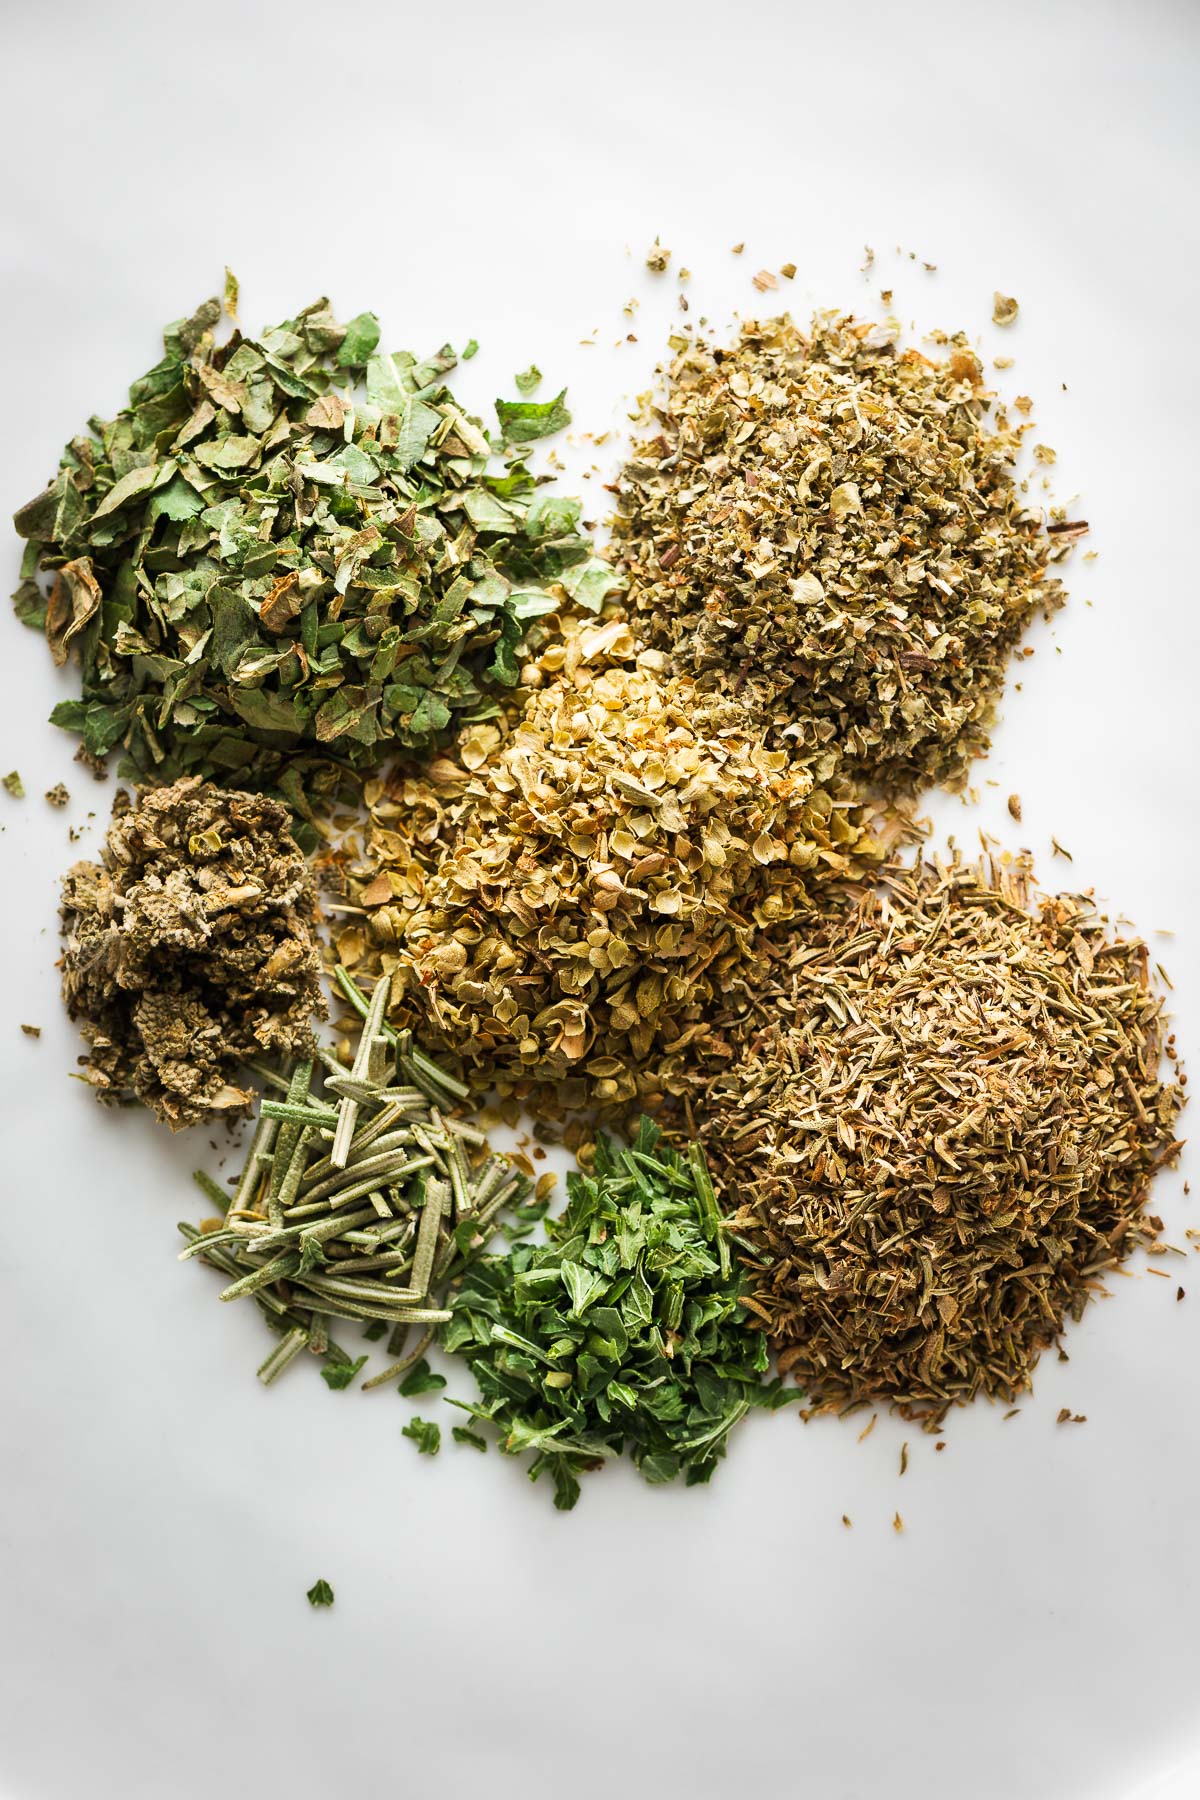 A close-up of small heaps of dried Italian herbs viewed from above.